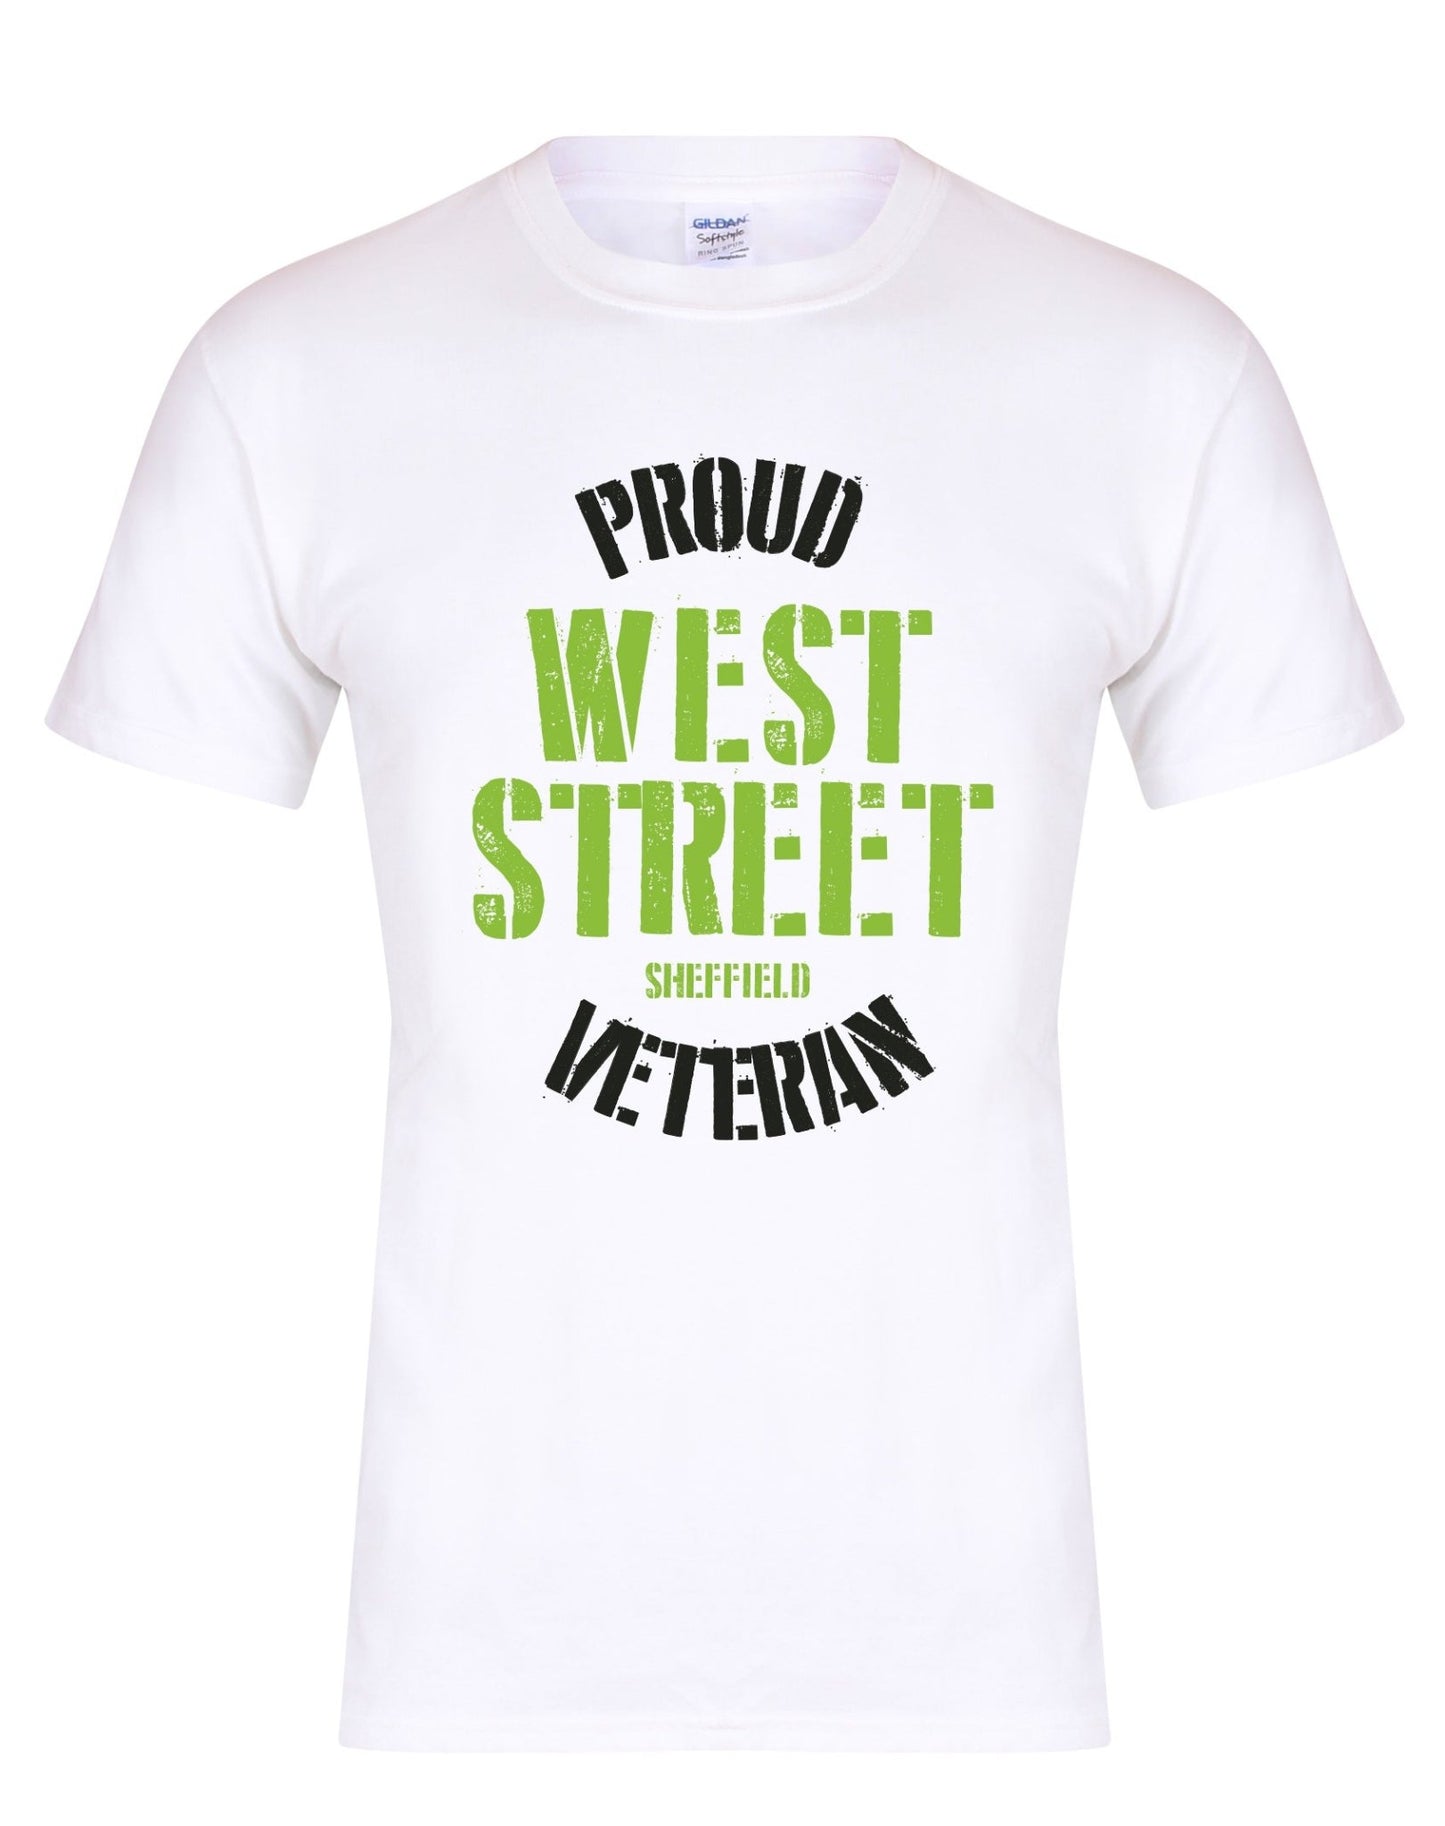 West Street Veteran unisex fit T-shirt - various colours - Dirty Stop Outs